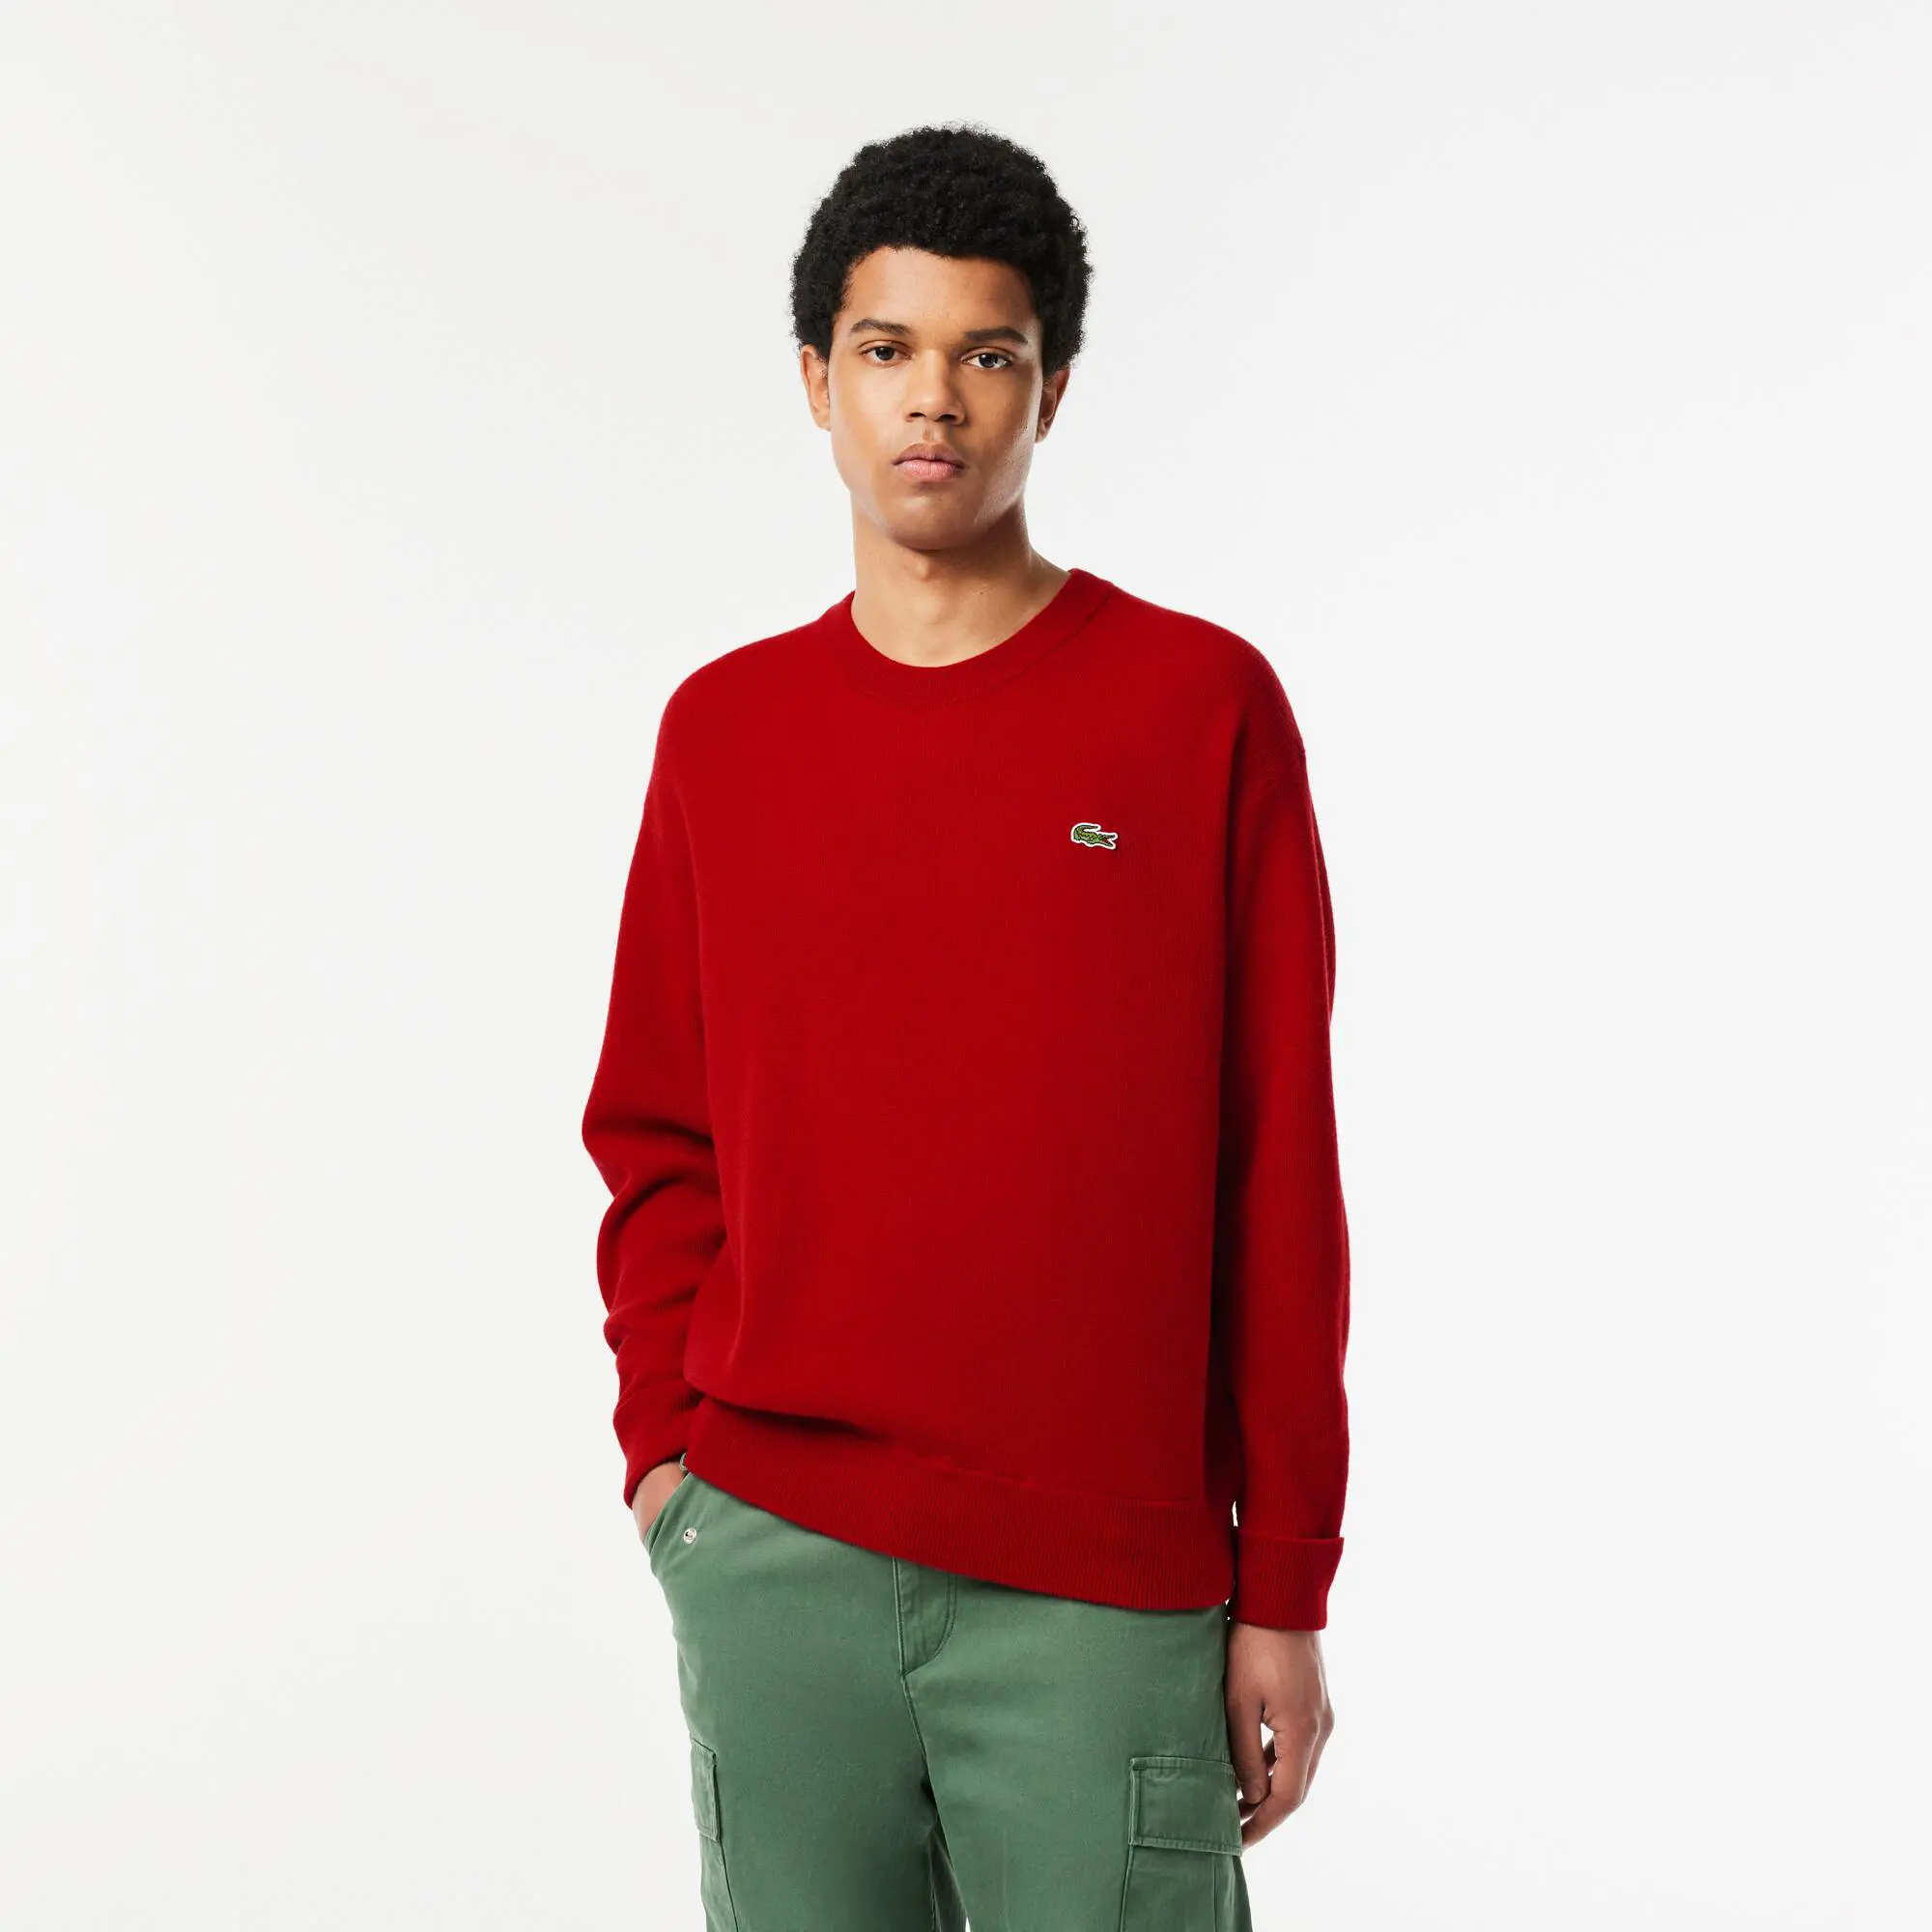 Lacoste Men's Lacoste Relaxed Fit Crew Neck Wool Sweater. 1